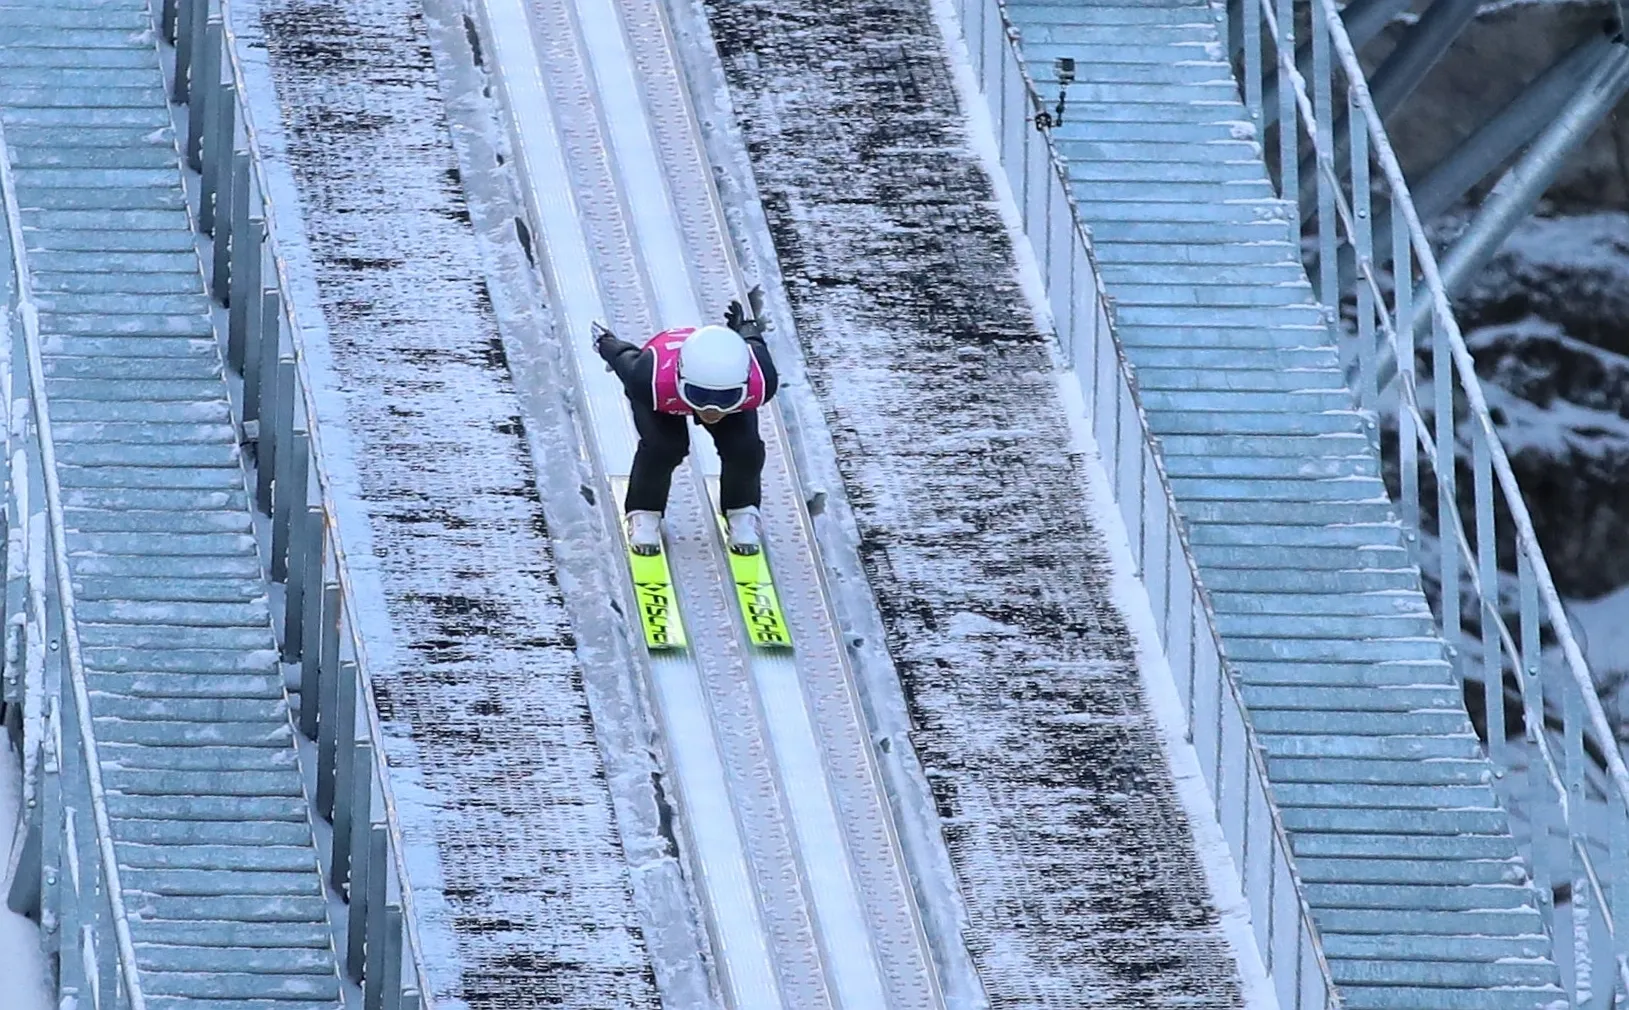 Photo showing: 1st Round of Ski jumping – Men's Individual at the 2020 Winter Youth Olympics in Lausanne on 19 January 2020.